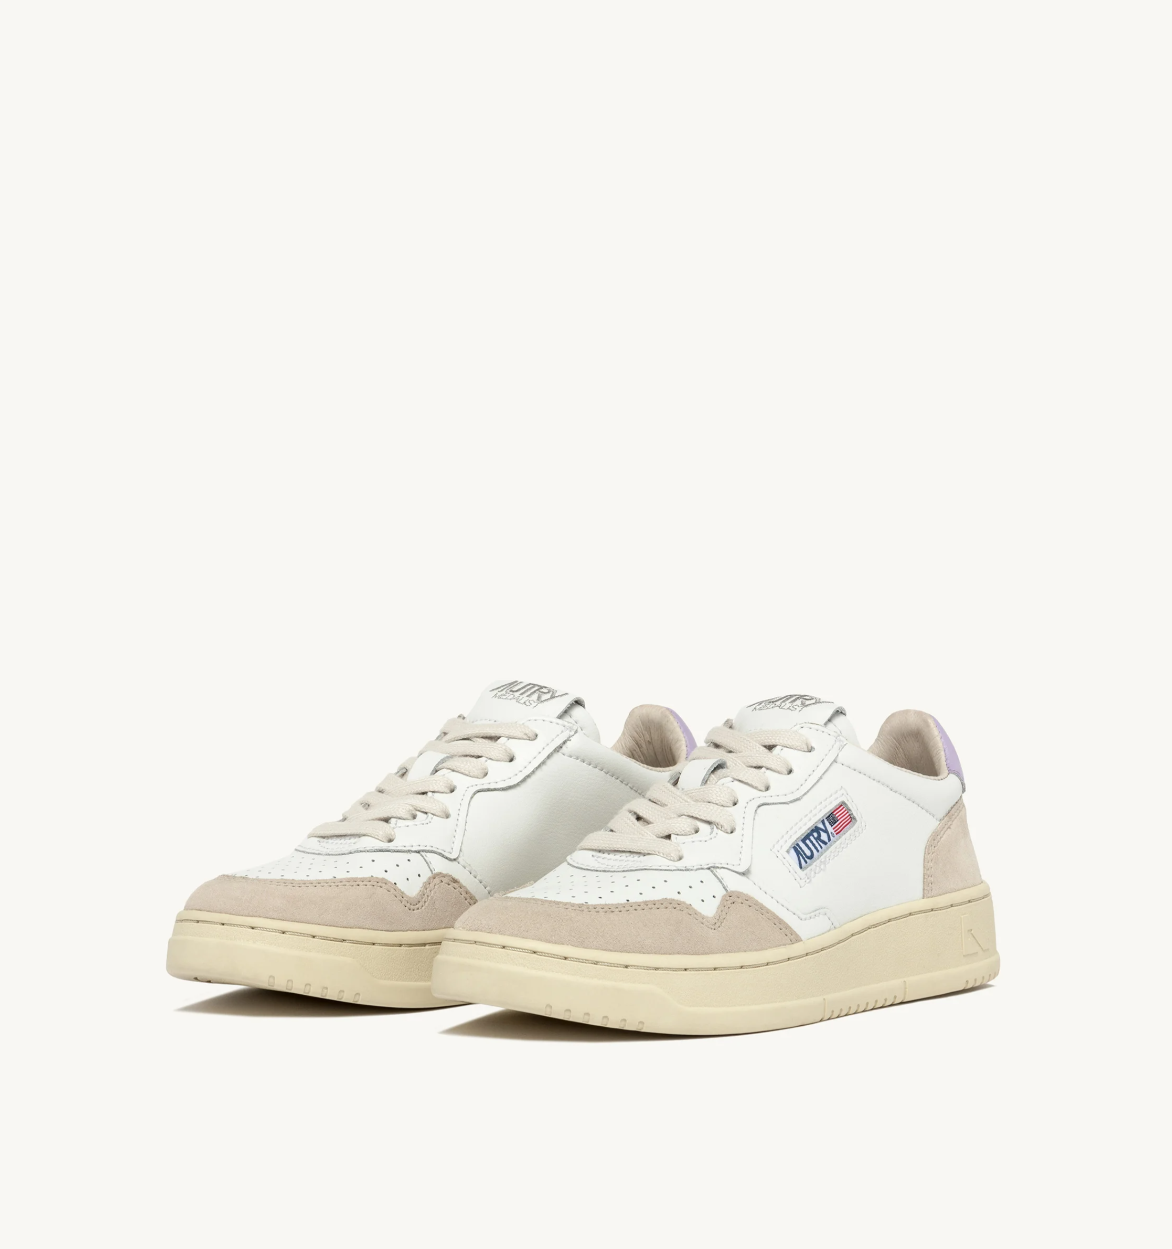 MEDALIST LOW LS68 SUEDE/LEATHER WHITE/PSLILAC